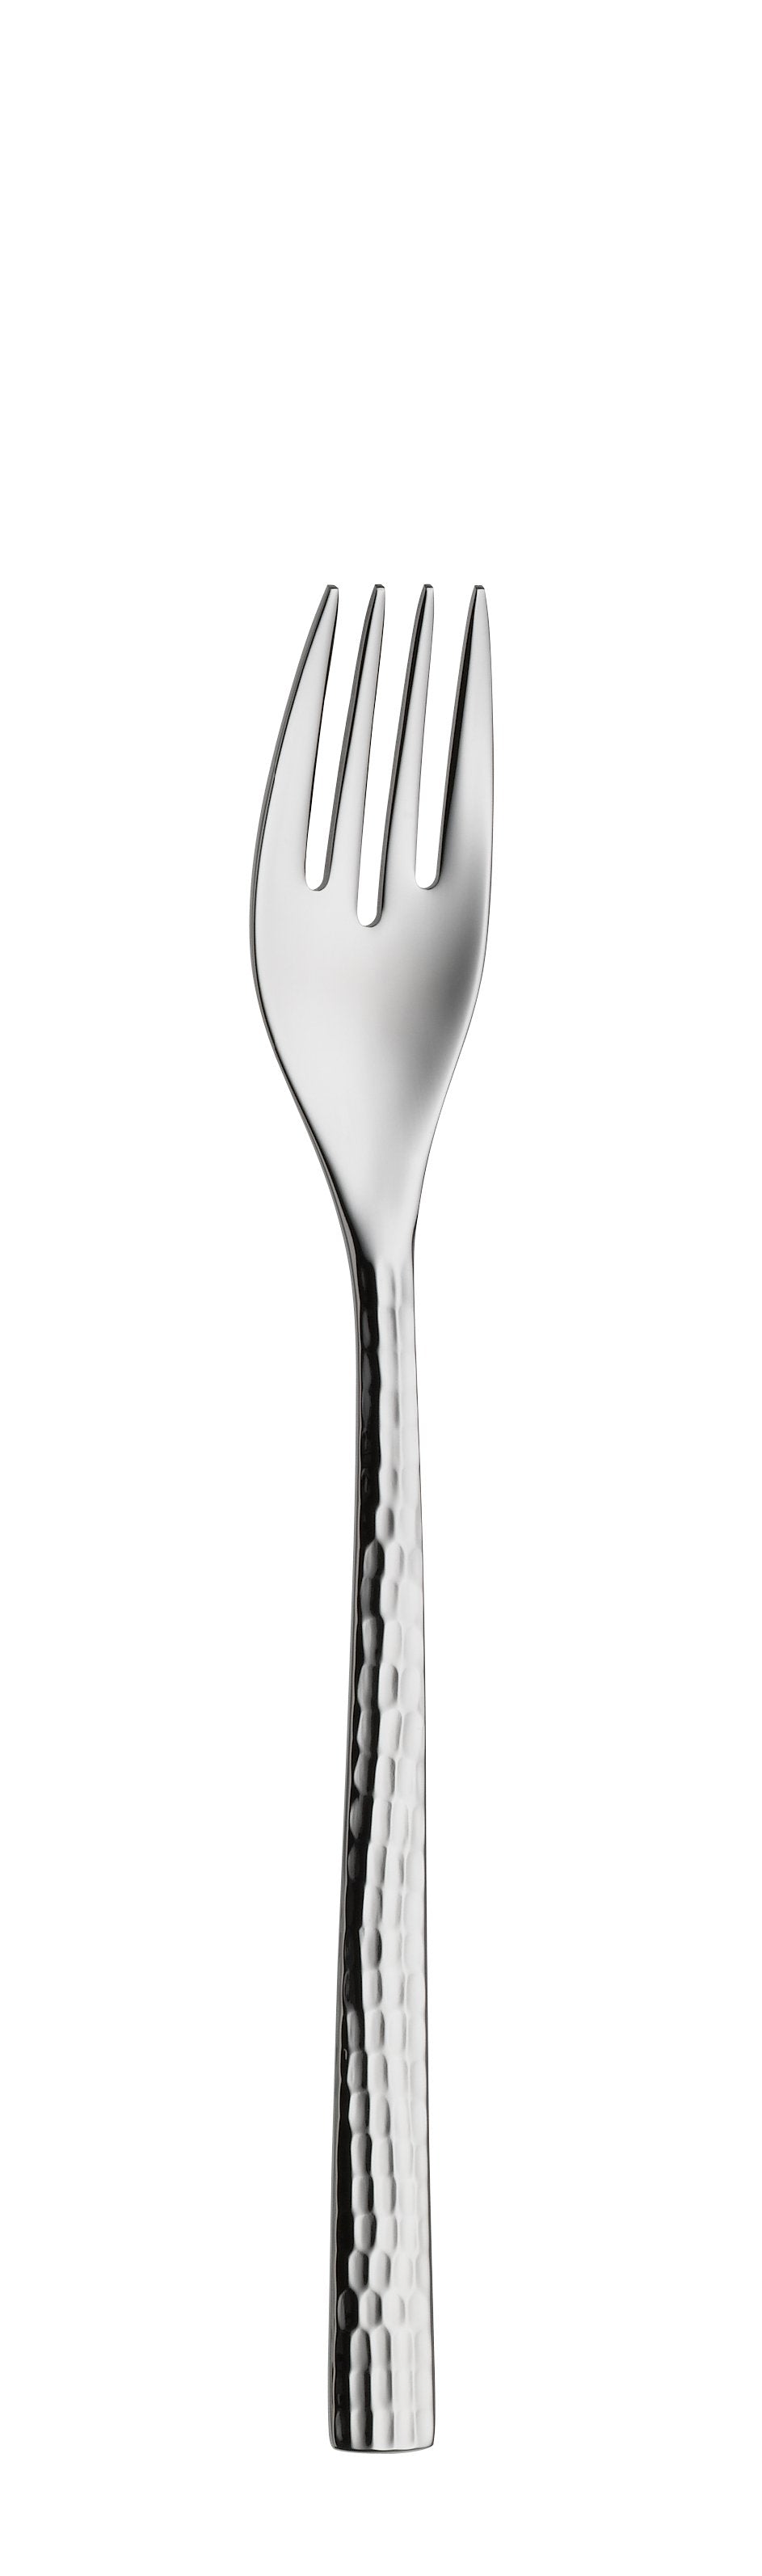 Fish fork LENISTA silverplated 195mm